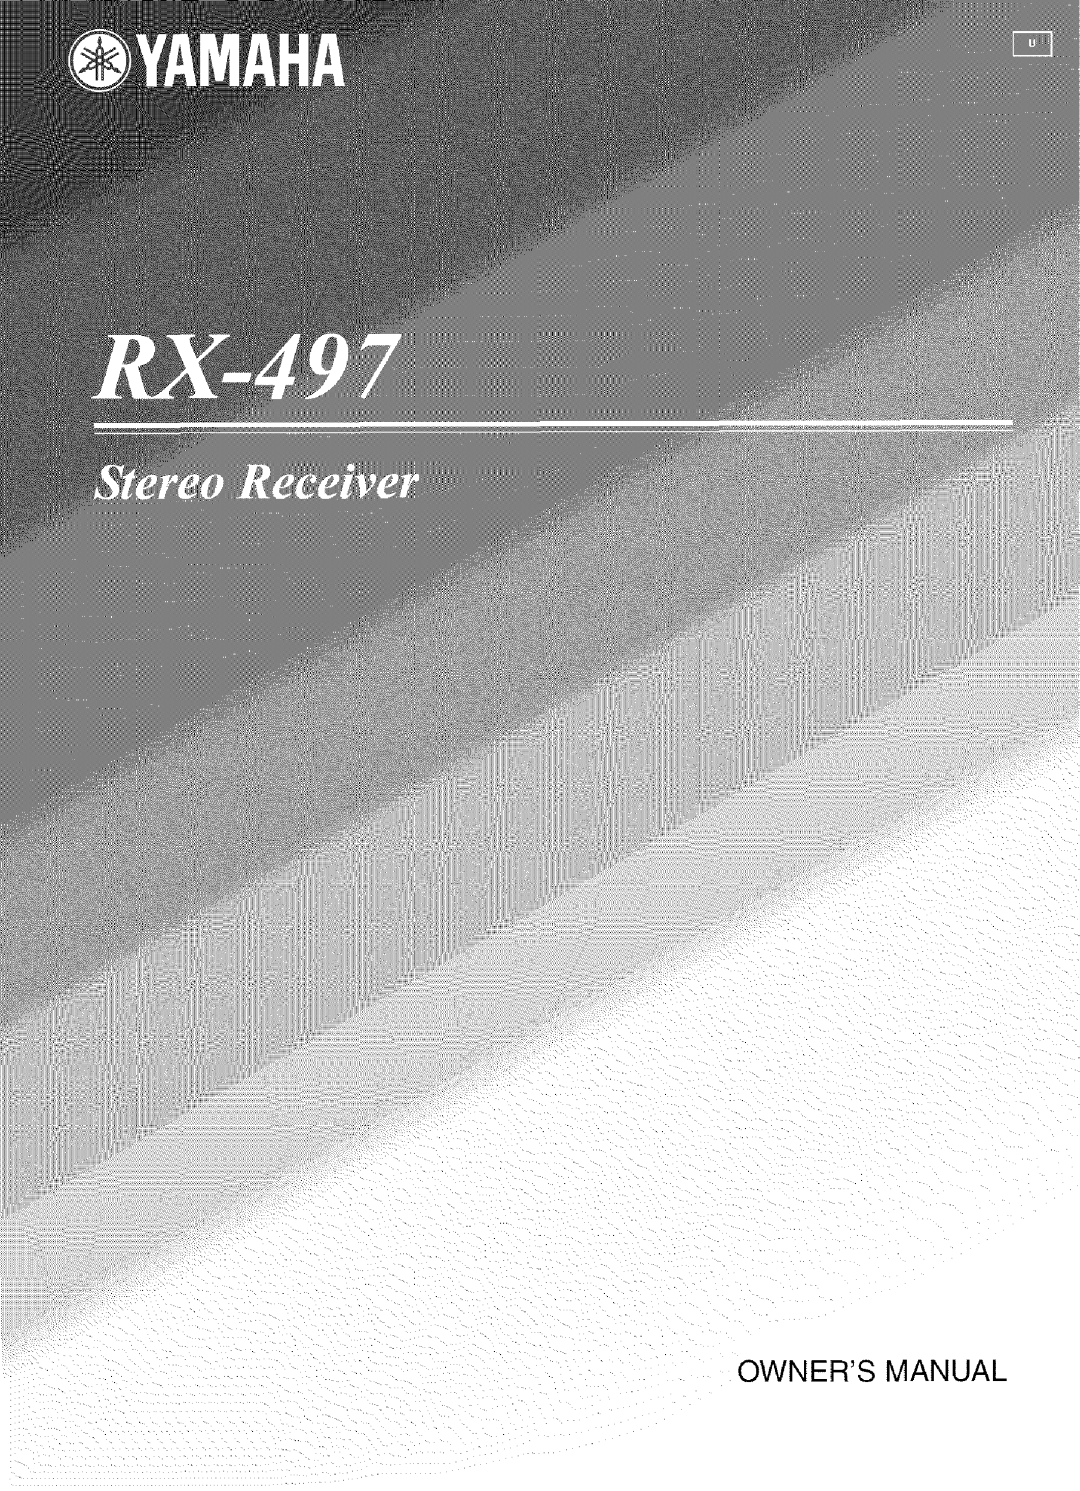 Yamaha RX-497 owner manual Stereo Receiver 